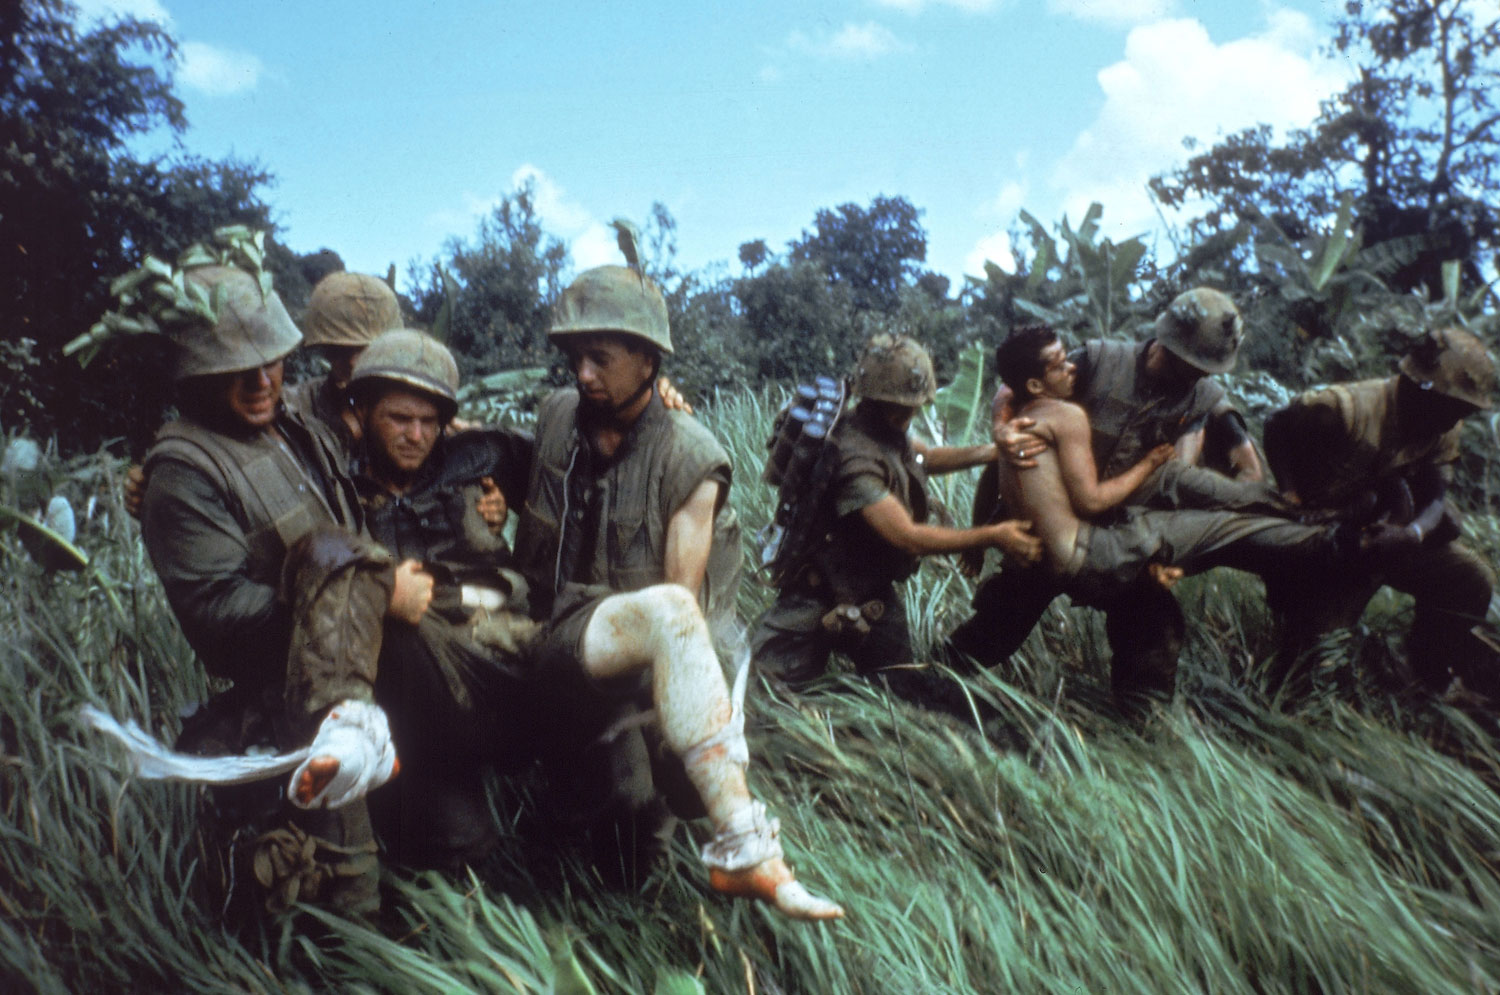 Not published in LIFE. U.S. Marines carry their wounded during a firefight near the southern edge of the DMZ, Vietnam, October 1966.